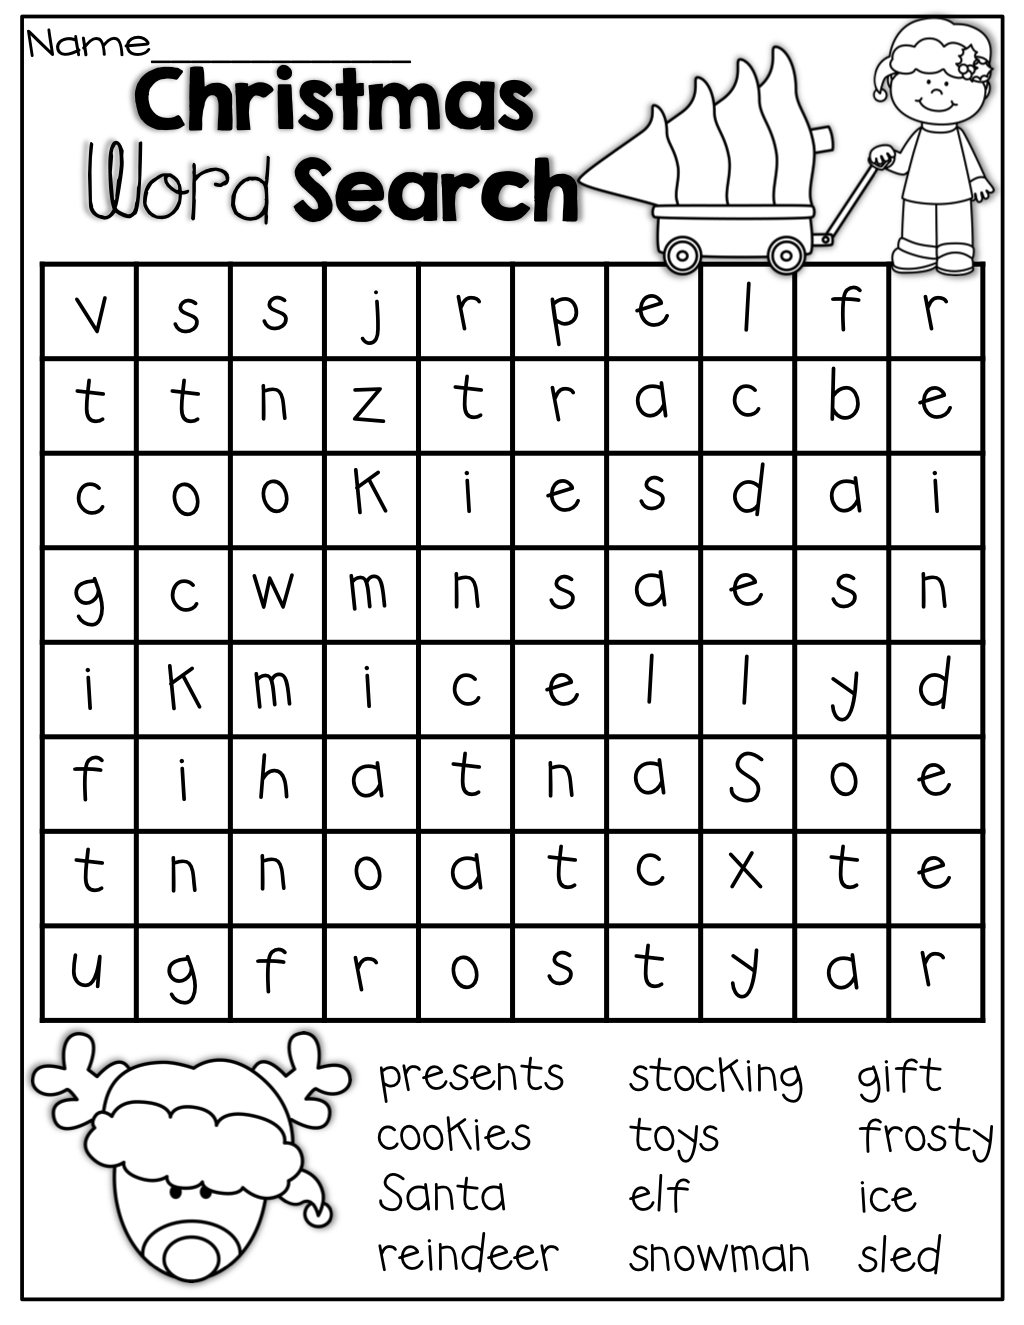 December No Prep Packet (1St Grade) | School-Holidays-Christmas - Printable Crossword Puzzles For 1St Graders